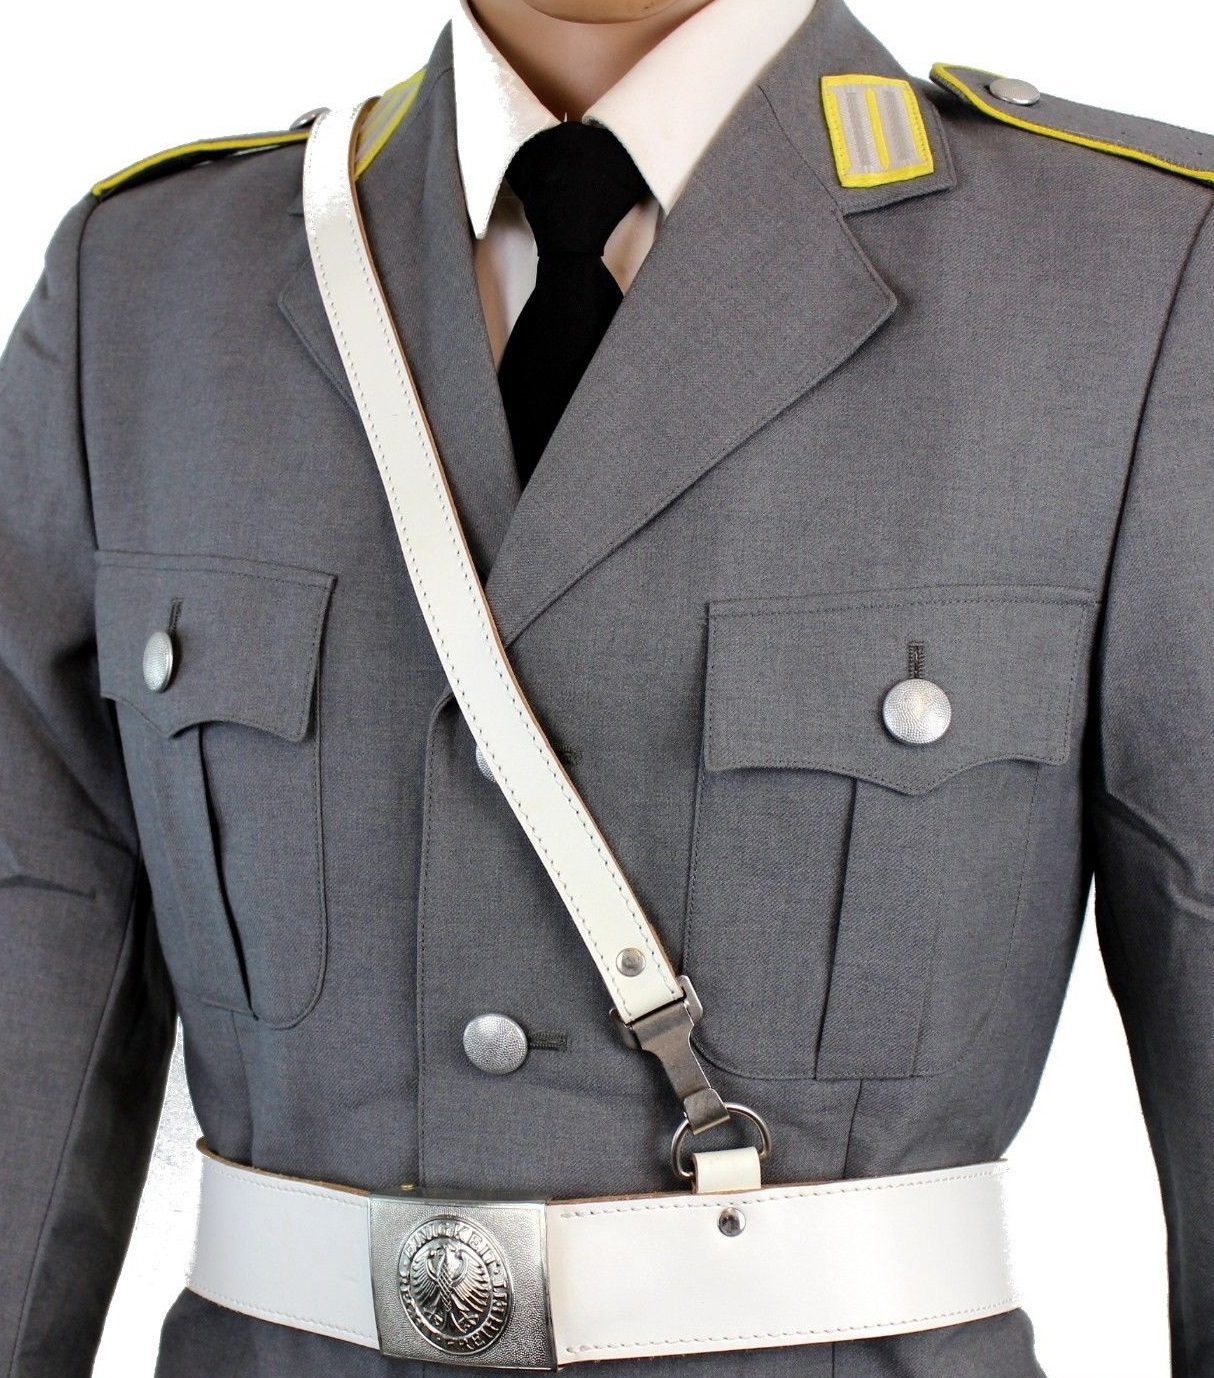 Primary image for Vintage German army white leather belt marching parade Bundeswehr military dress